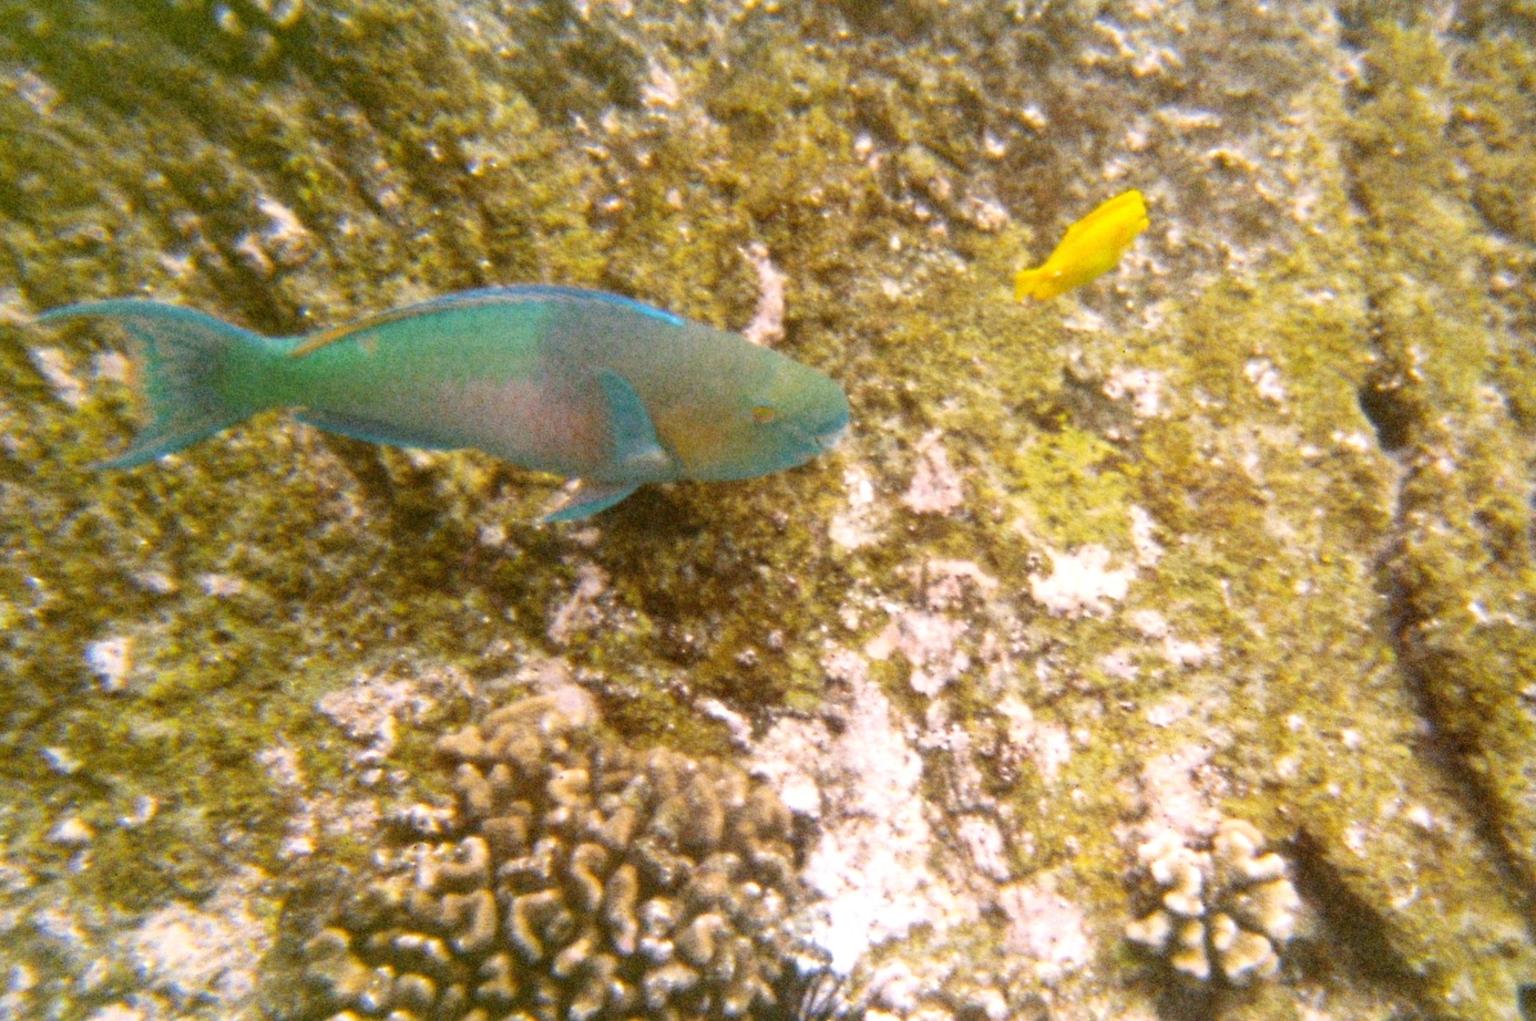 Fish in the Corral reef